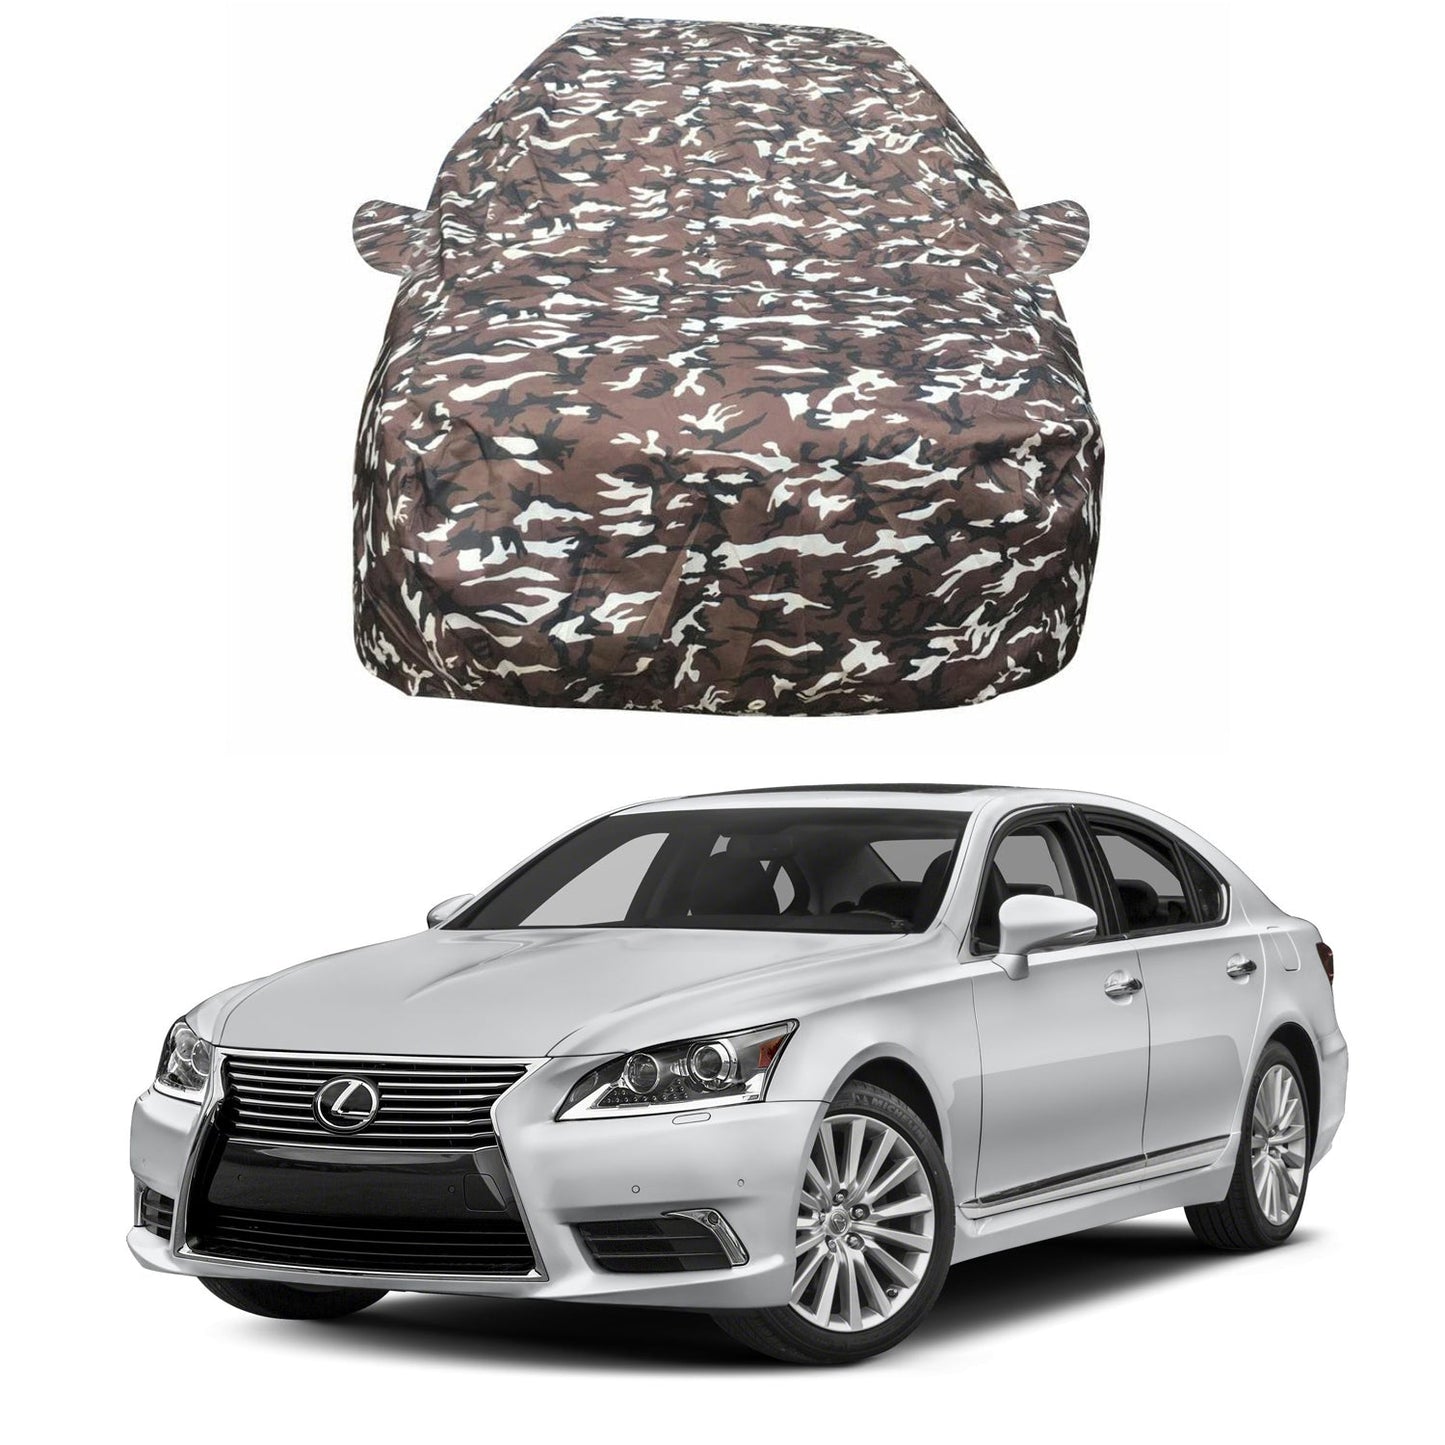 Oshotto Ranger Design Made of 100% Waterproof Fabric Car Body Cover with Mirror Pockets For Lexus LS